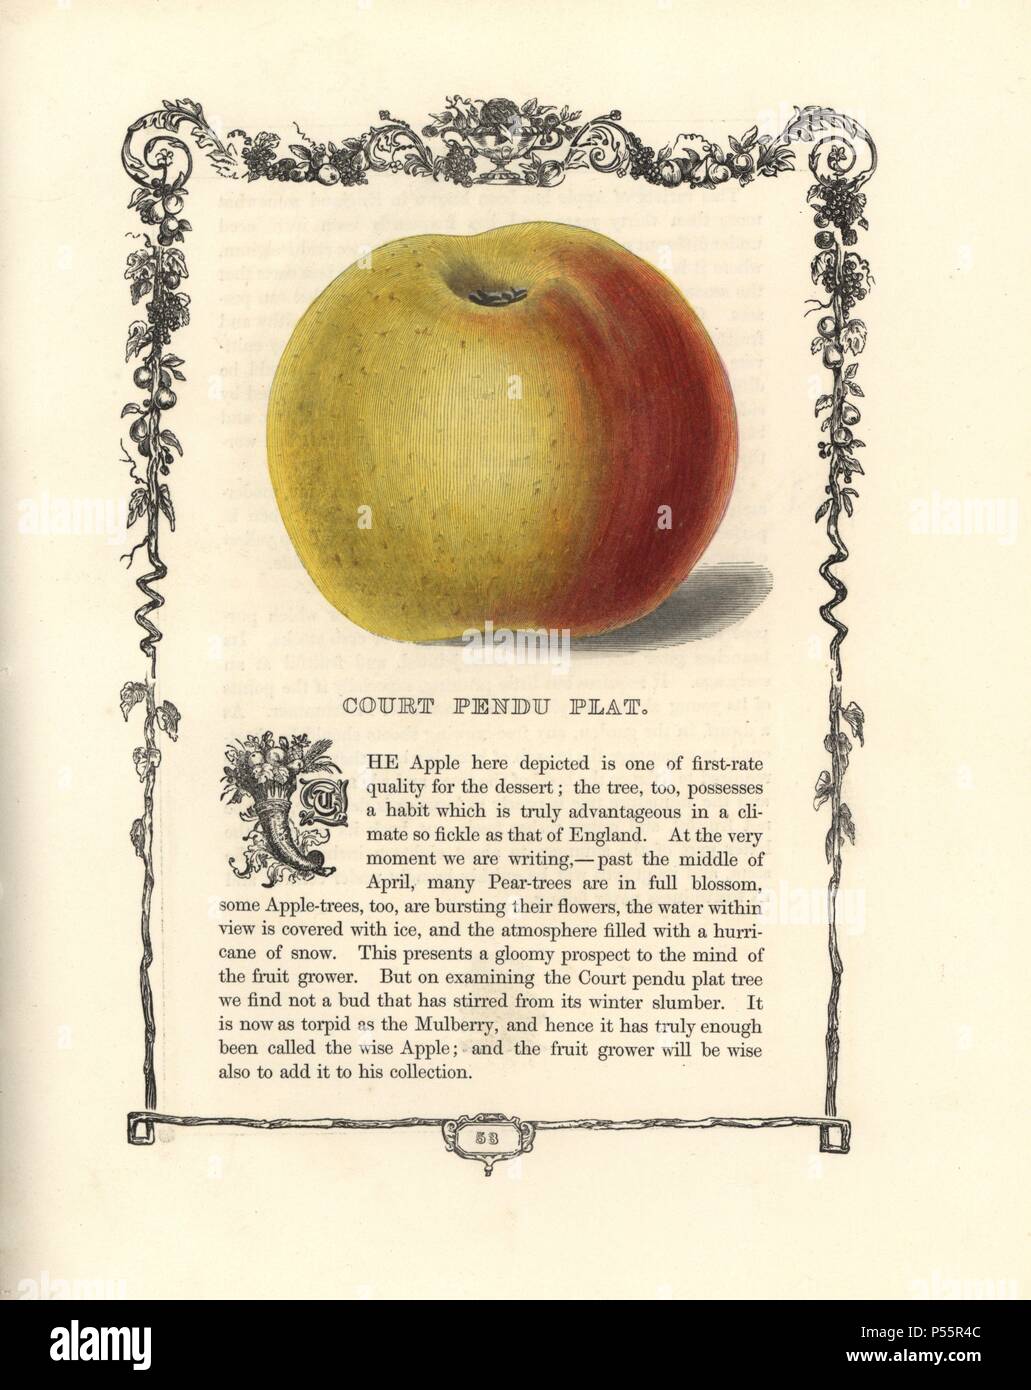 Court Pendu Plat apple, Malus domestica, within a Della Robbia ornamental frame with text below. Handcoloured glyphograph from Benjamin Maund's 'The Fruitist,' London, 1850, Groombridge and Sons. Maund (1790–1863) was a pharmacist, botanist, printer, bookseller and publisher of 'The Botanic Garden' and 'The Botanist.'. Stock Photo